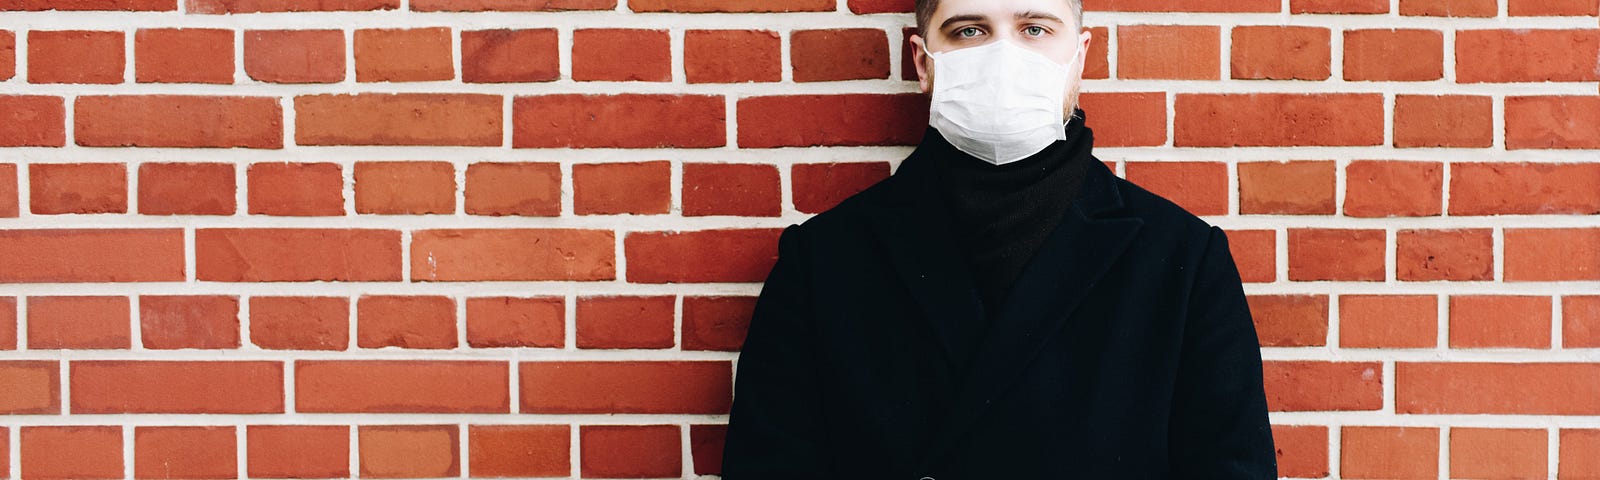 A man in a surgical mask stands against a brick wall.